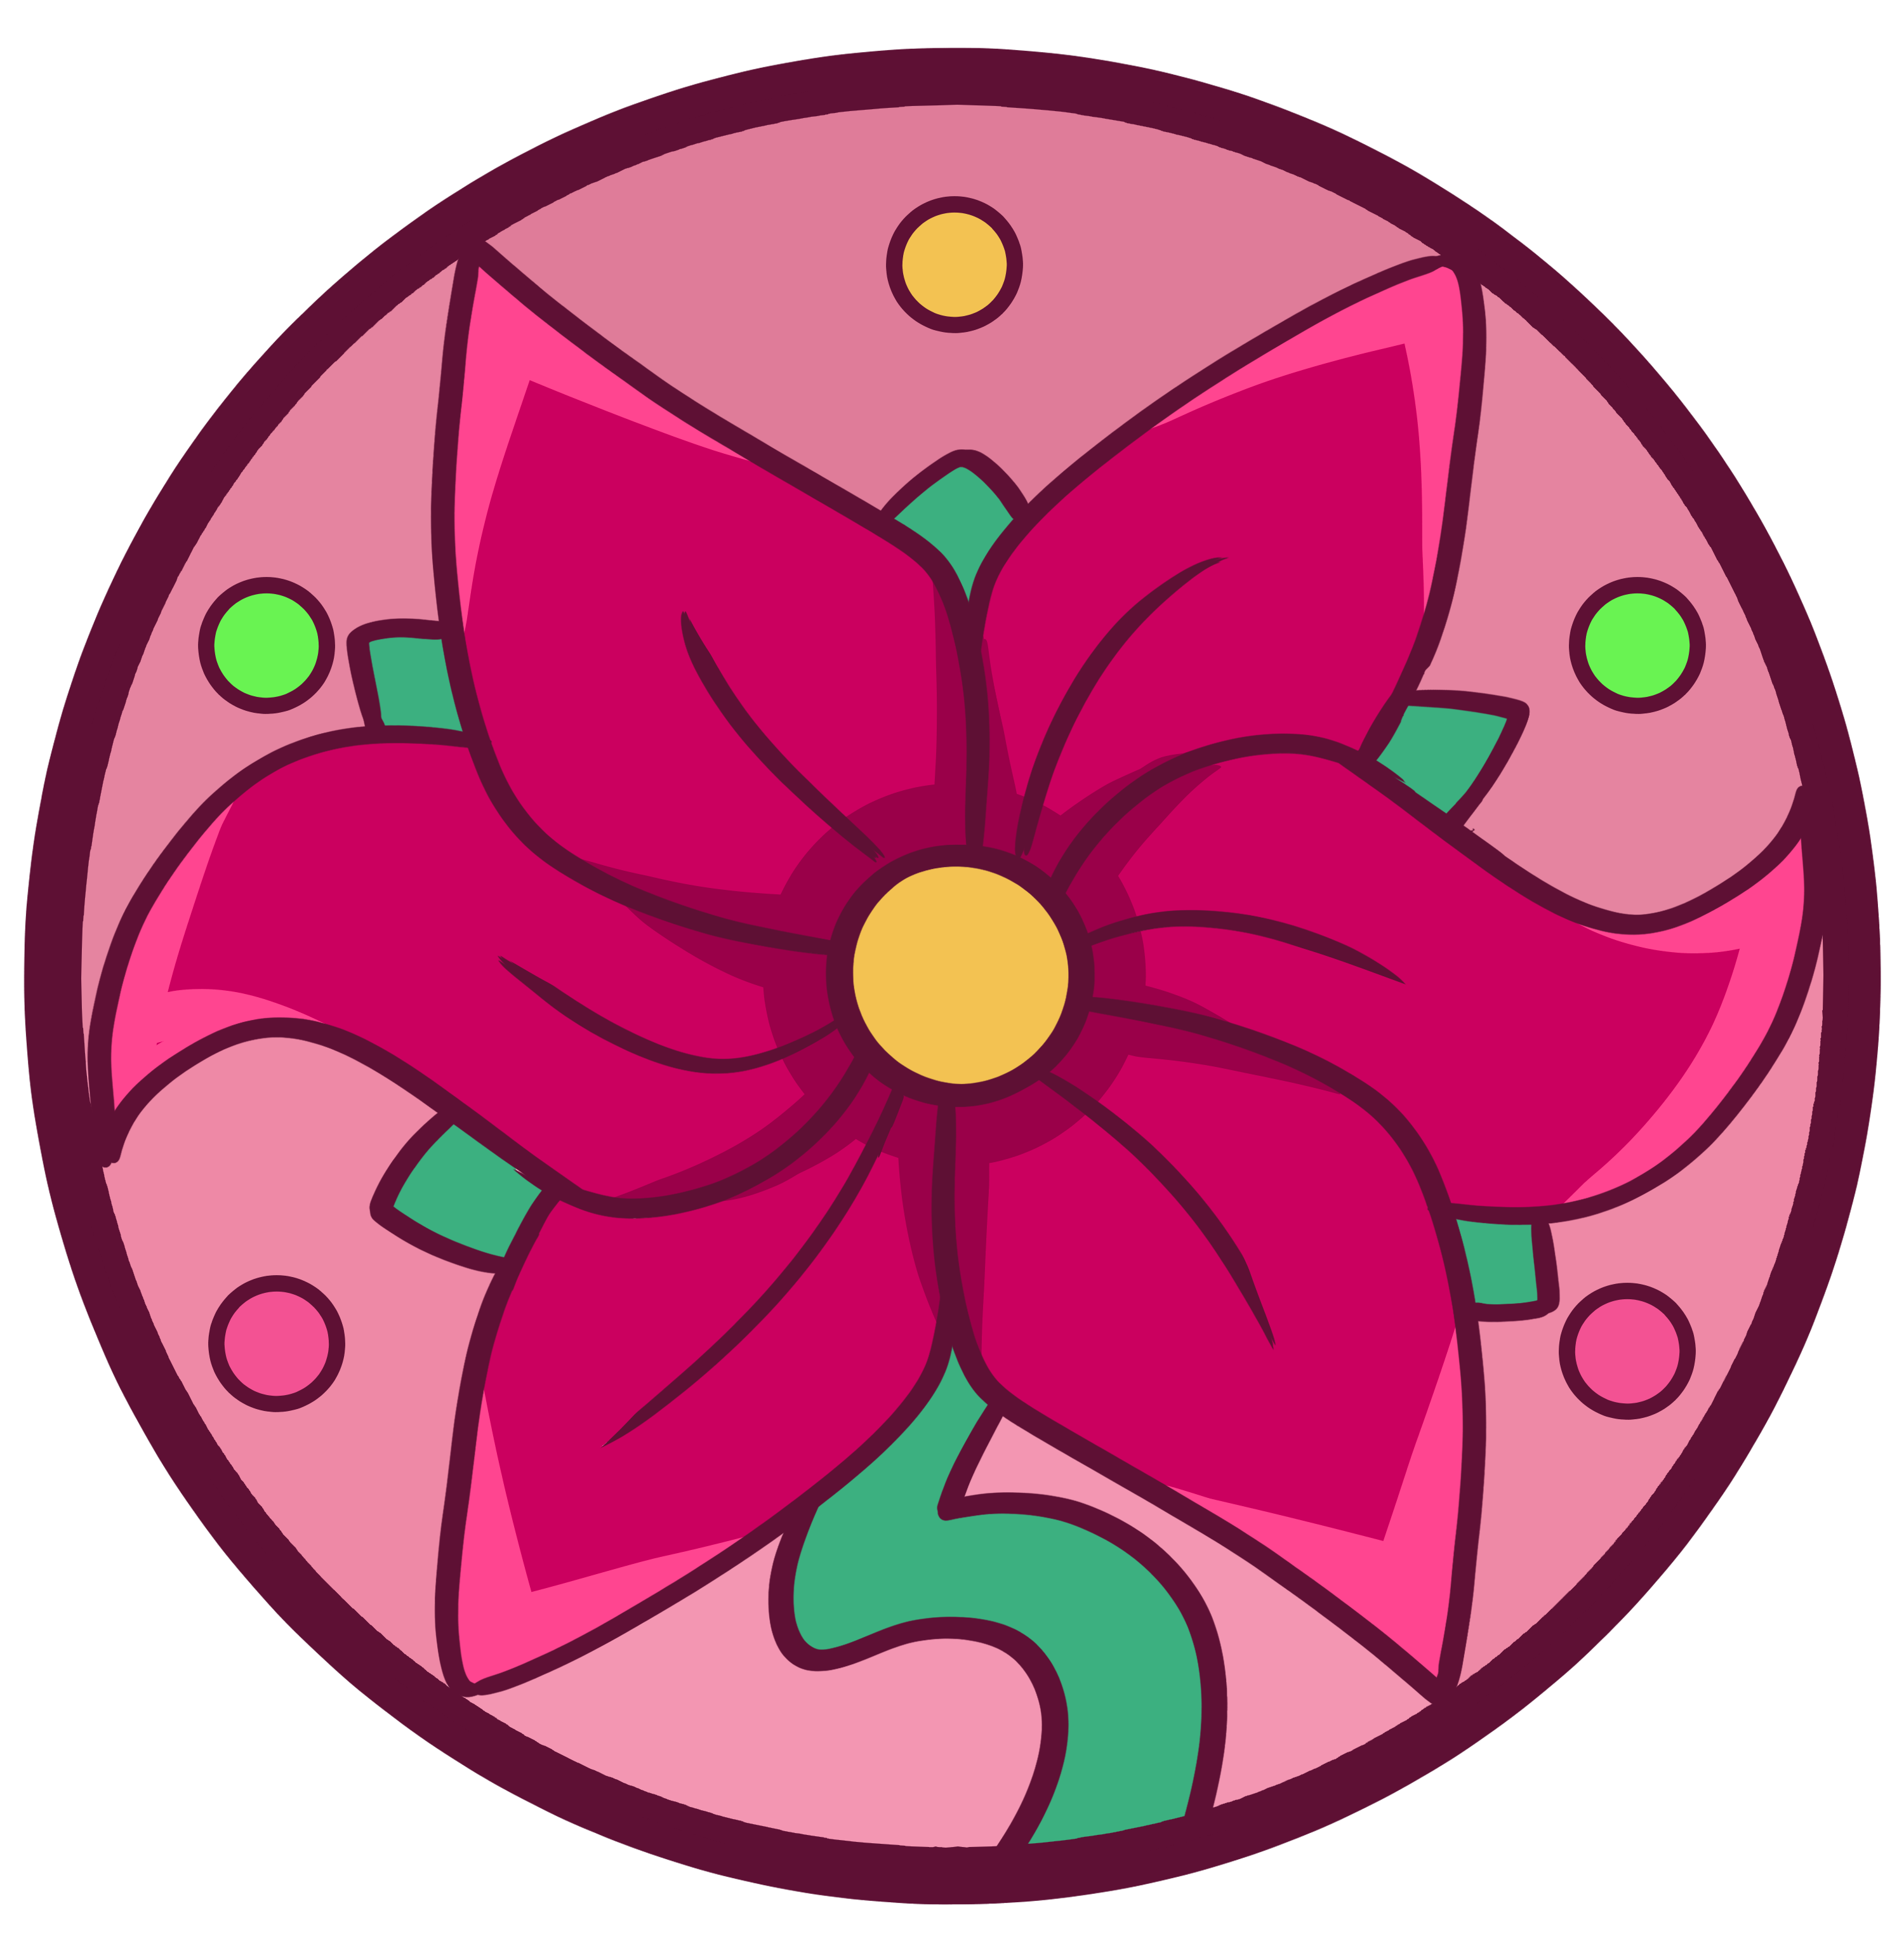 Bloom's logo, a 6 petaled flower with 5 orbs around it. It is colored in various pinks and greens.